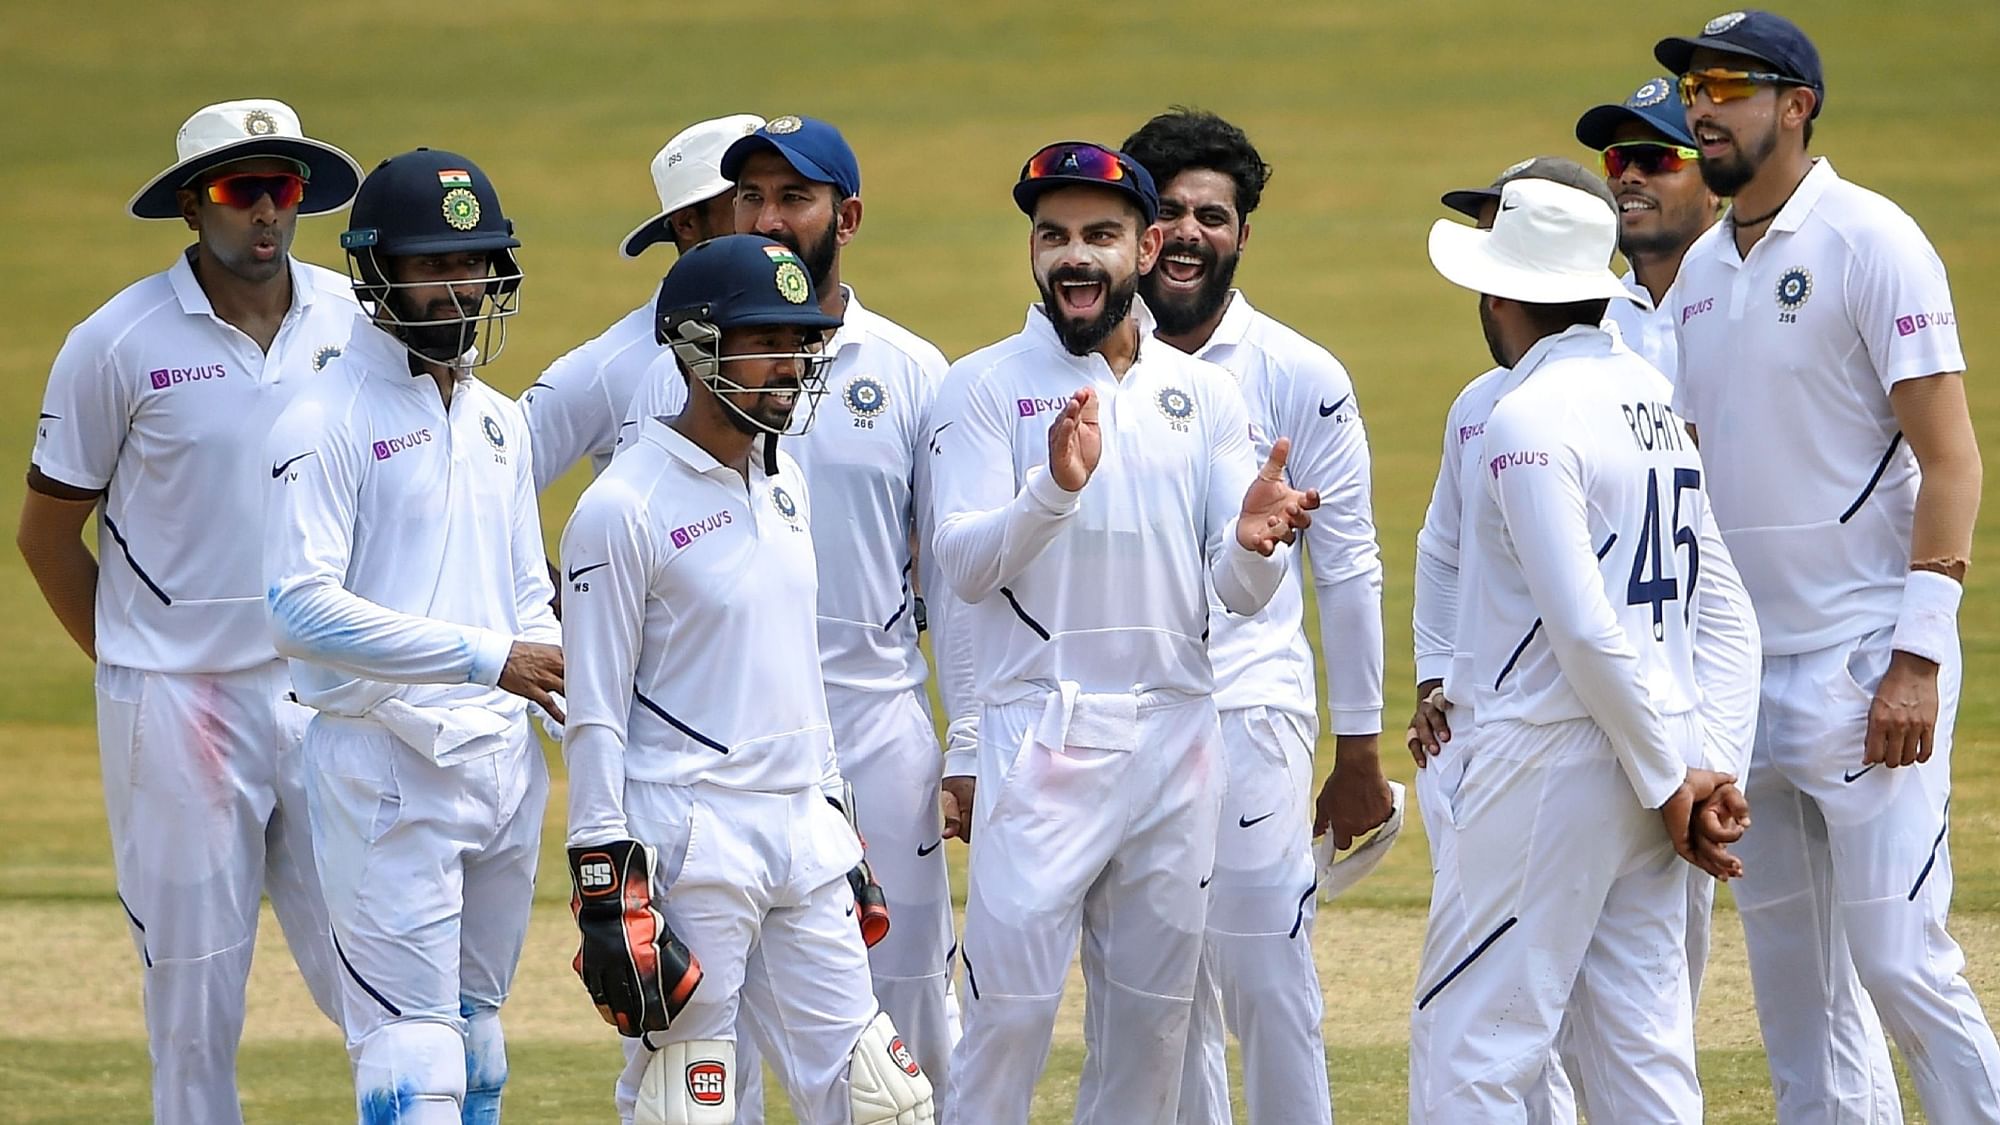  India and South Africa will clash in the second Test starting in Pune from Thursday, 10 October.